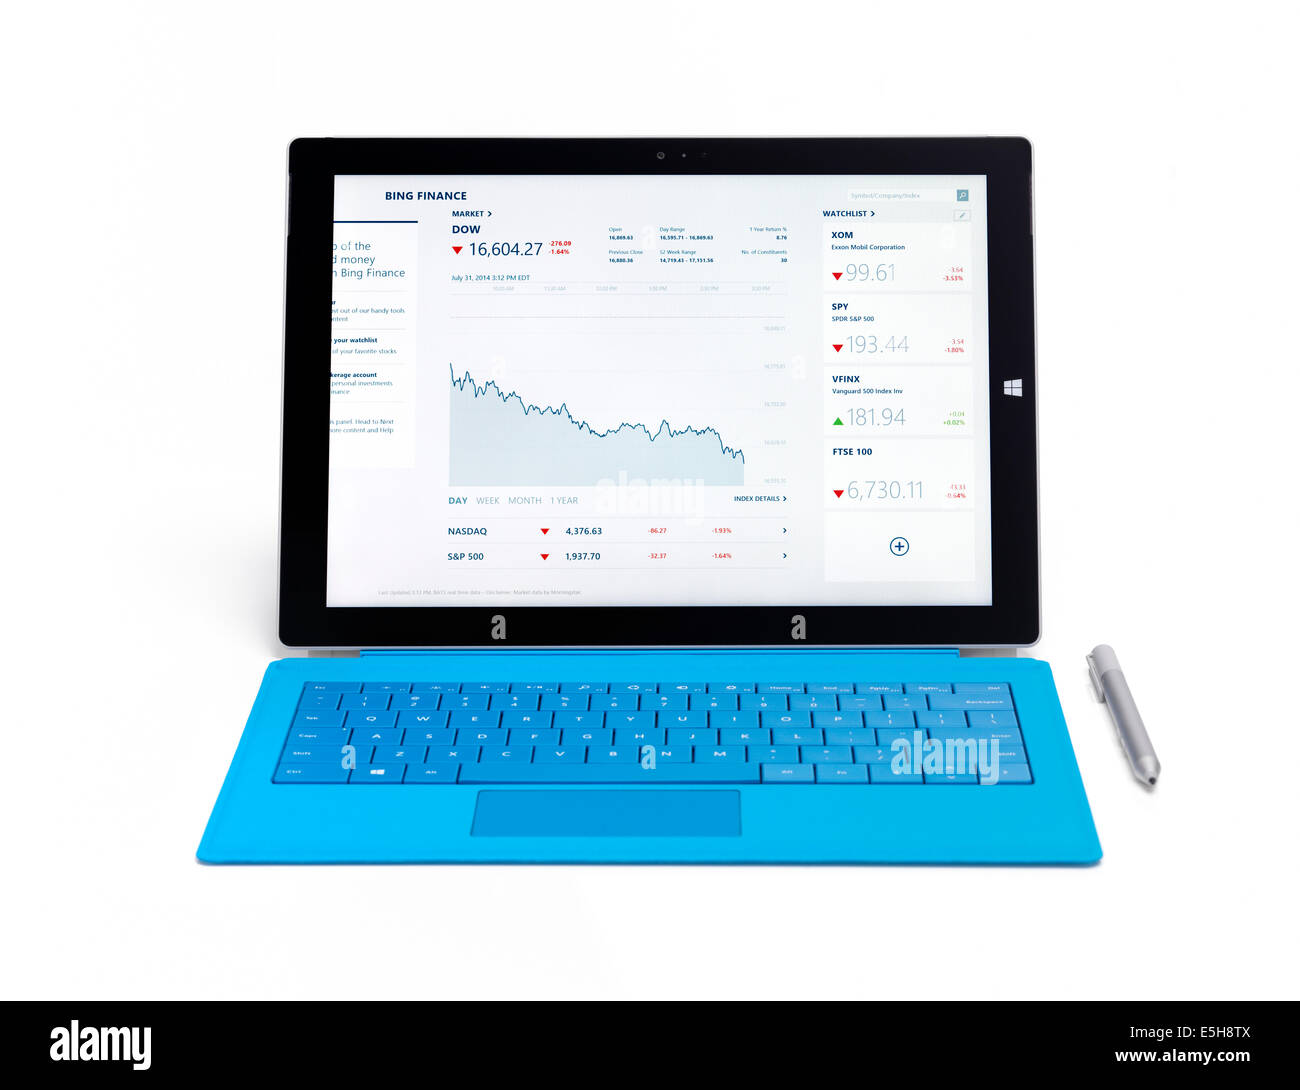 Microsoft Surface Pro 3 tablet computer with DOW stock market chart on display isolated on white background Stock Photo